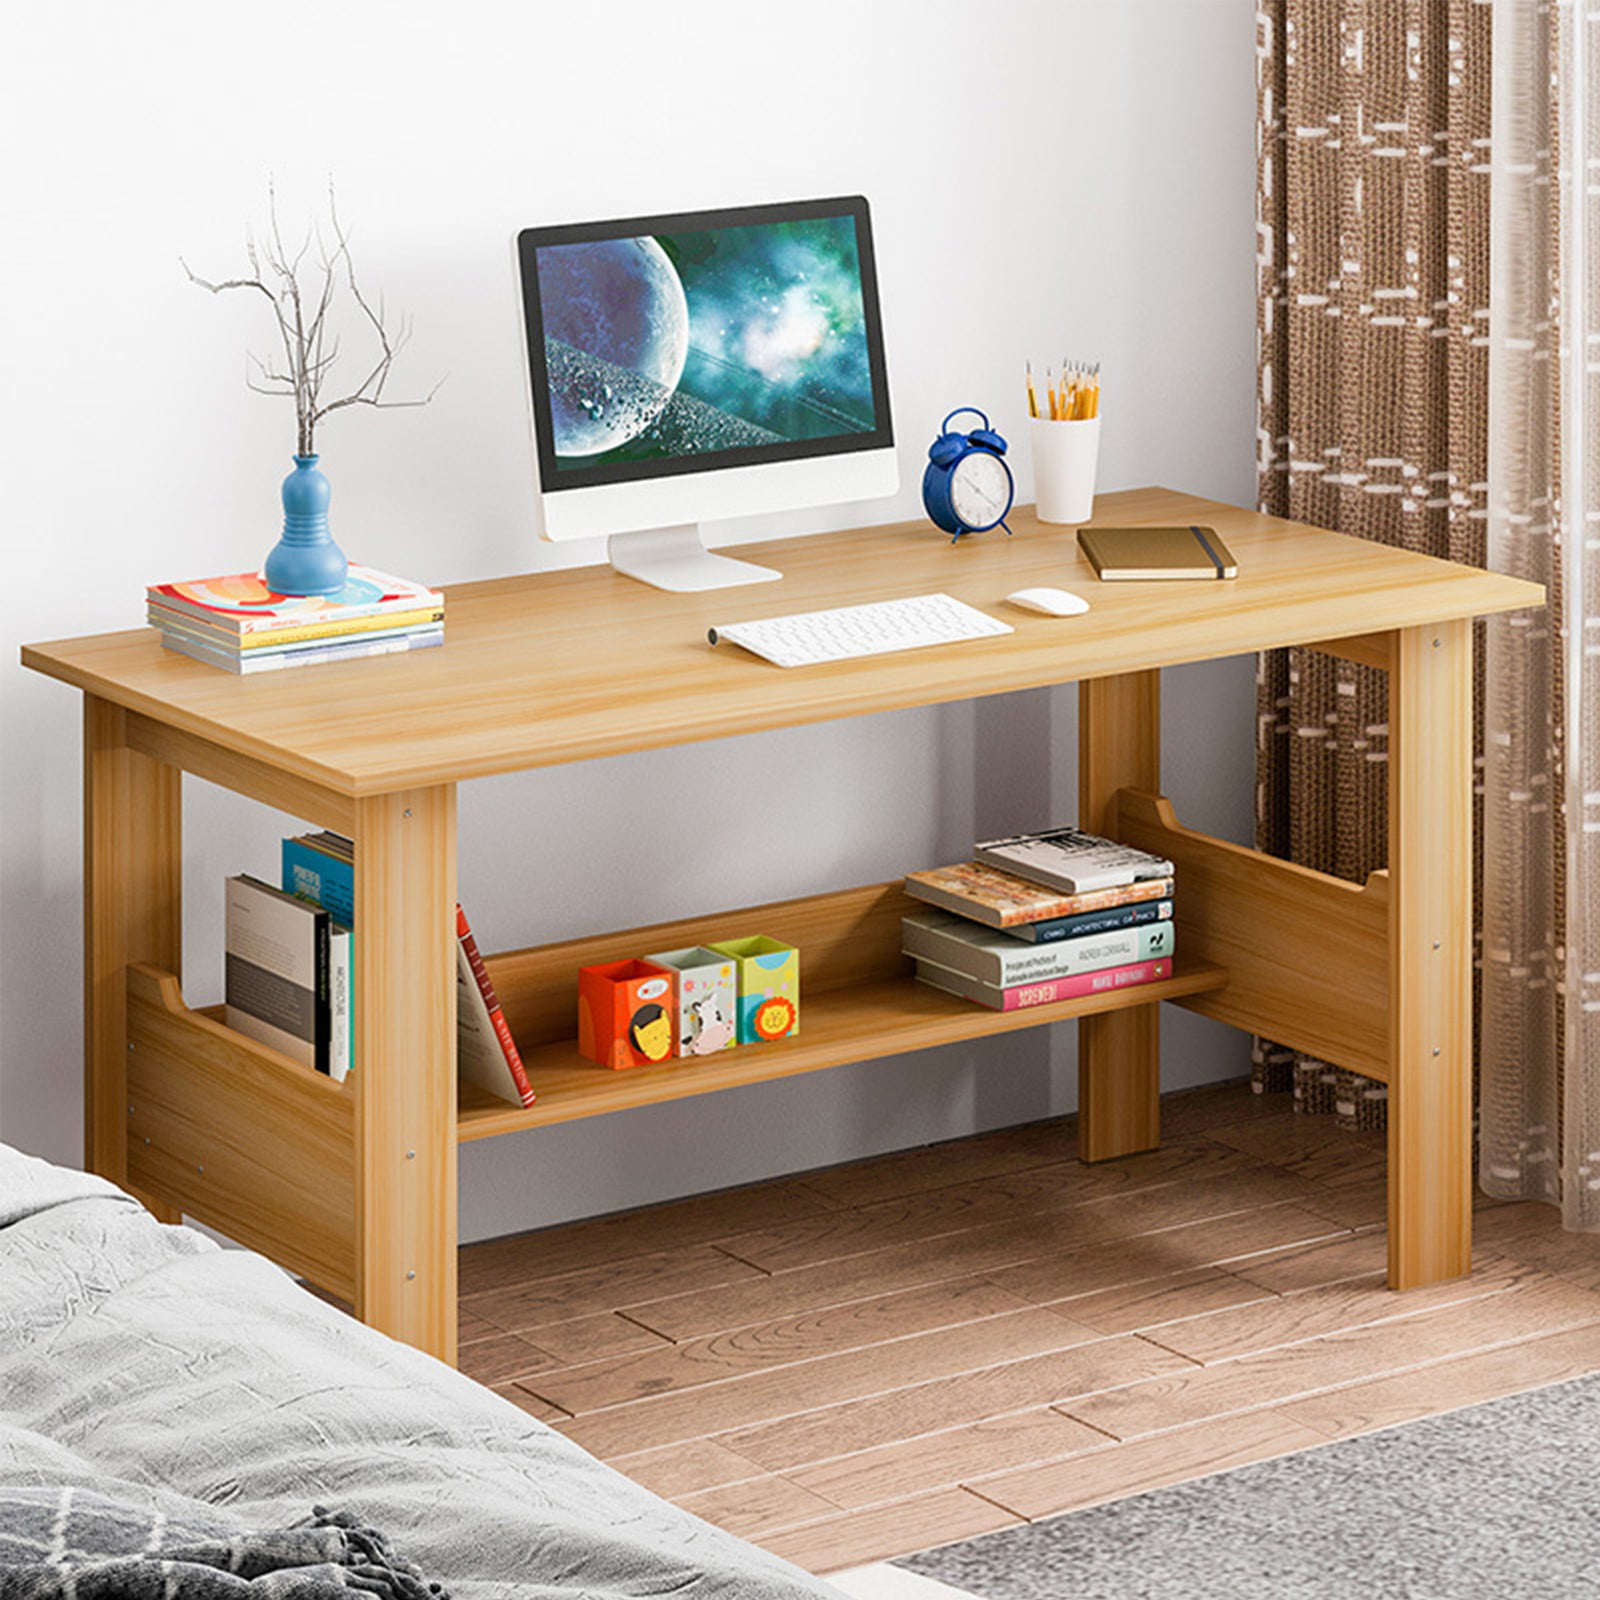 Sunyuan Desk Wood Compact Home Office, Compact Home Office Computer Desktop